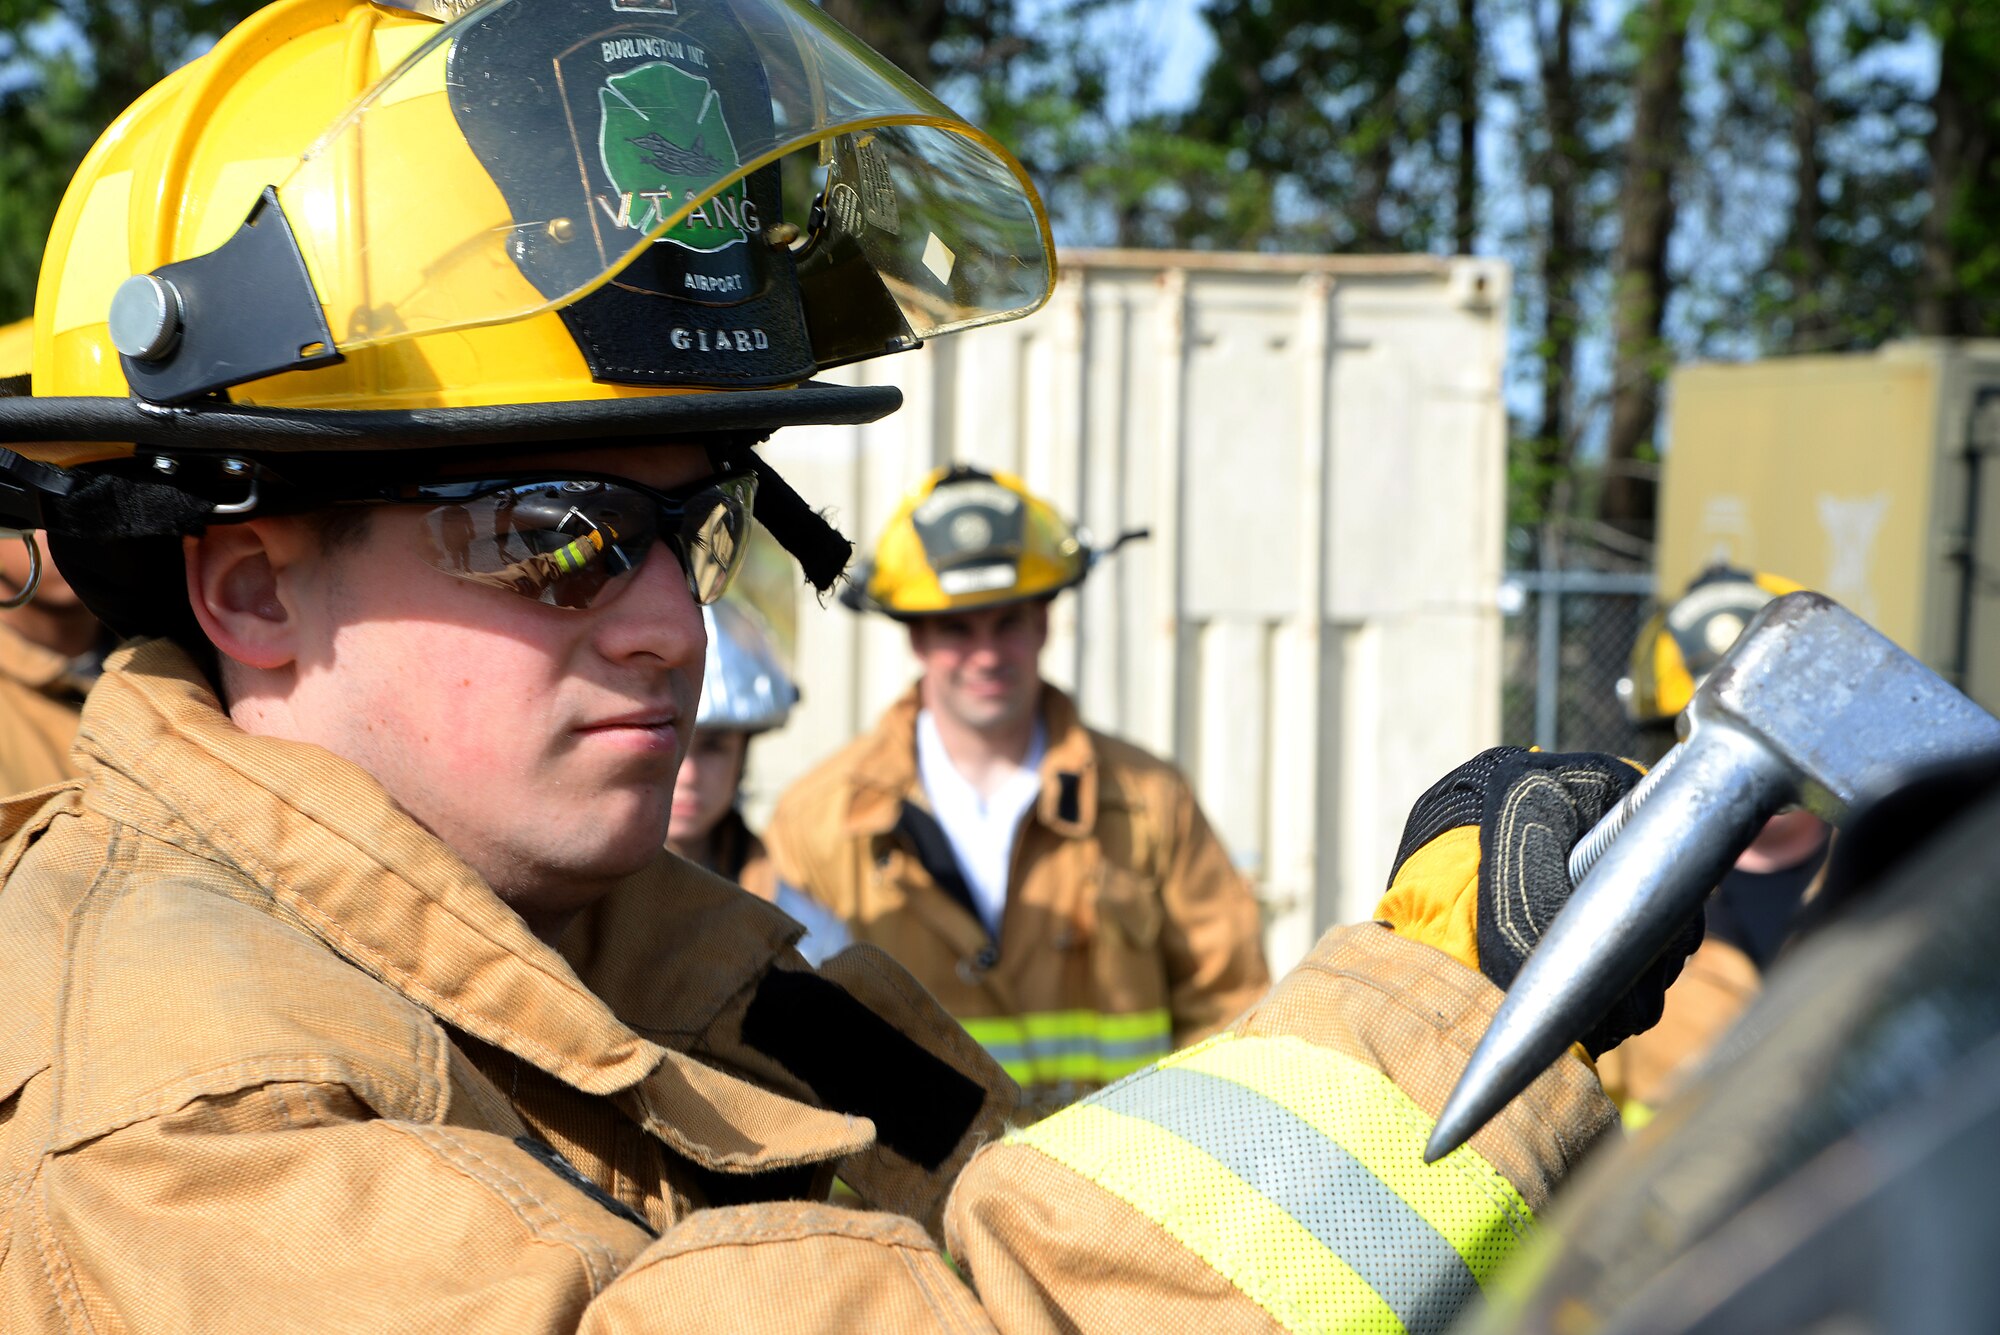 A picture of Airman 1st Class Evan Giard of the 158th Fighter Wing Fire Department, Vermont Air National Guard, utilizing a halligan tool to soften a vehicle.